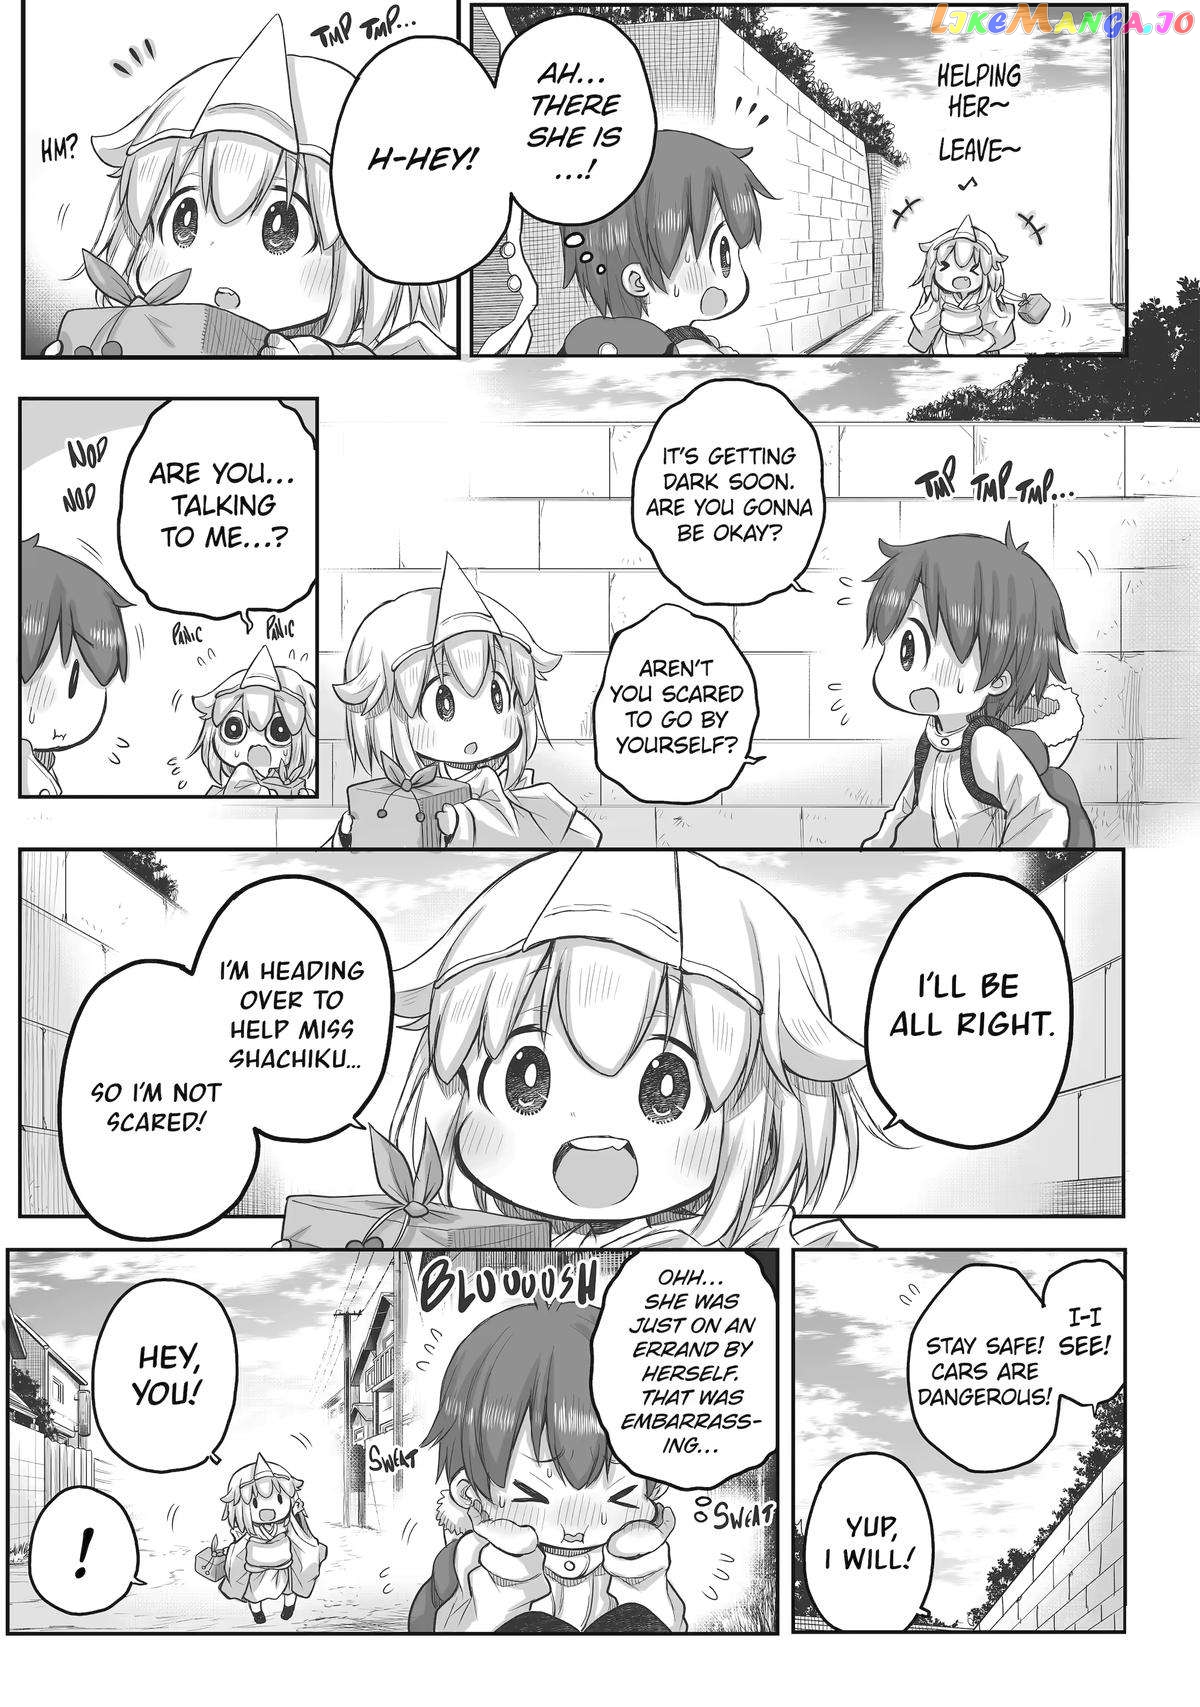 Ms. Corporate Slave Wants to be Healed by a Loli Spirit - chapter 64 - #3